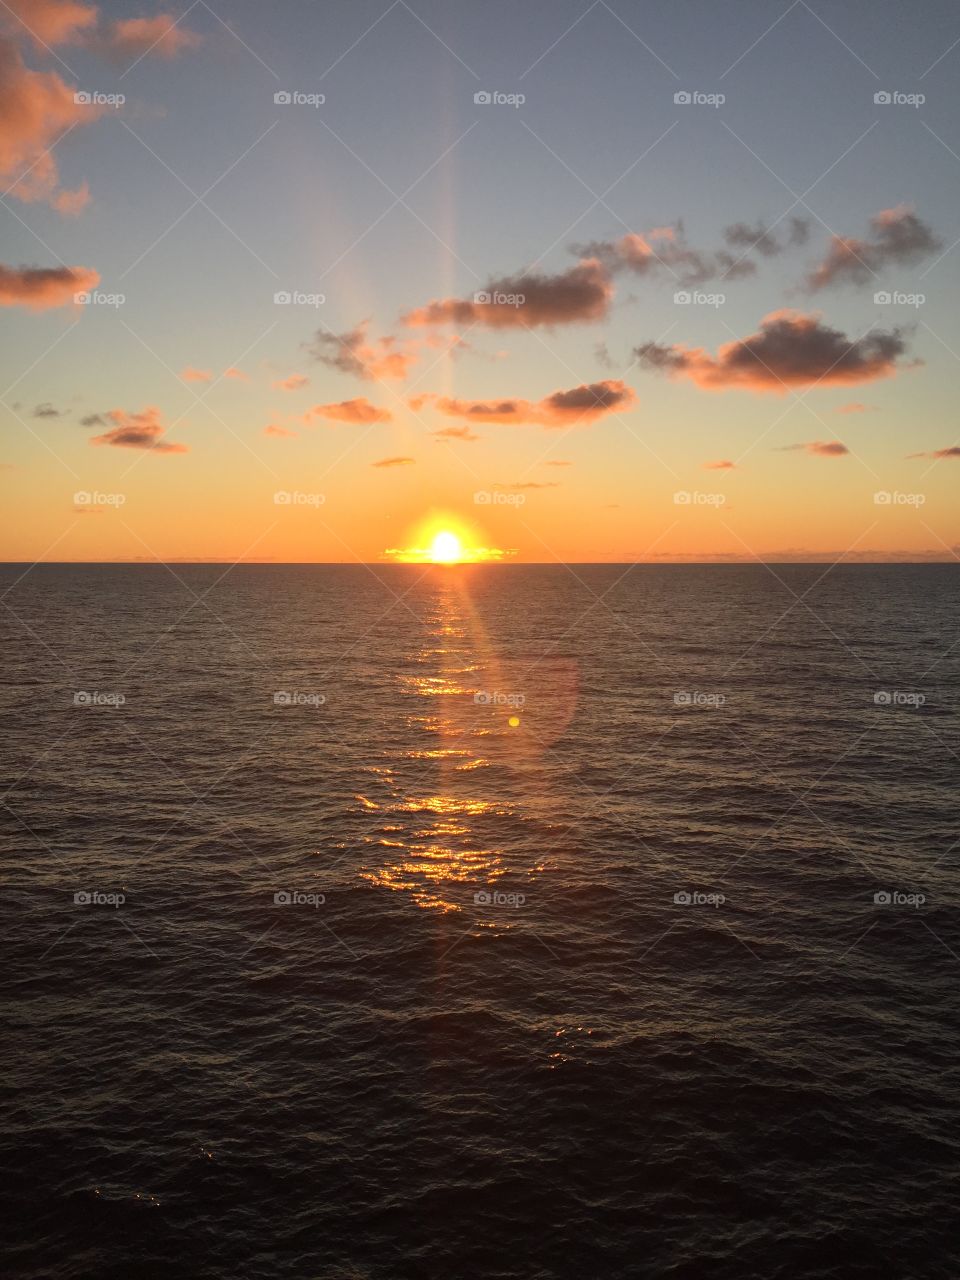 Gulf of Mexico: sunrise from an oilfield platform. 